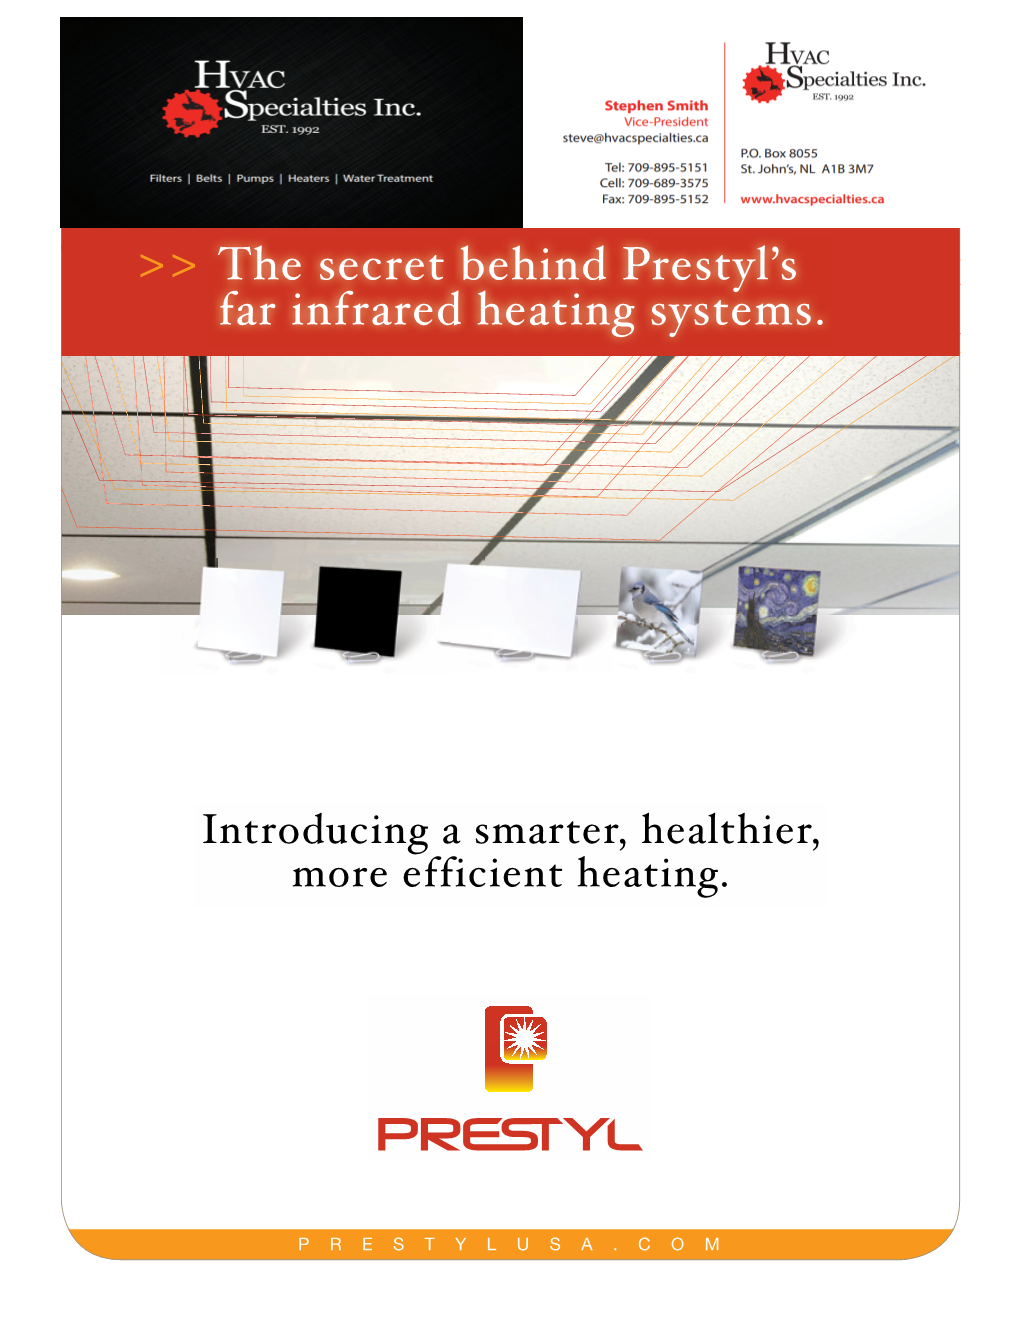 The Secret Behind Prestyl's Far Infrared Heating Systems